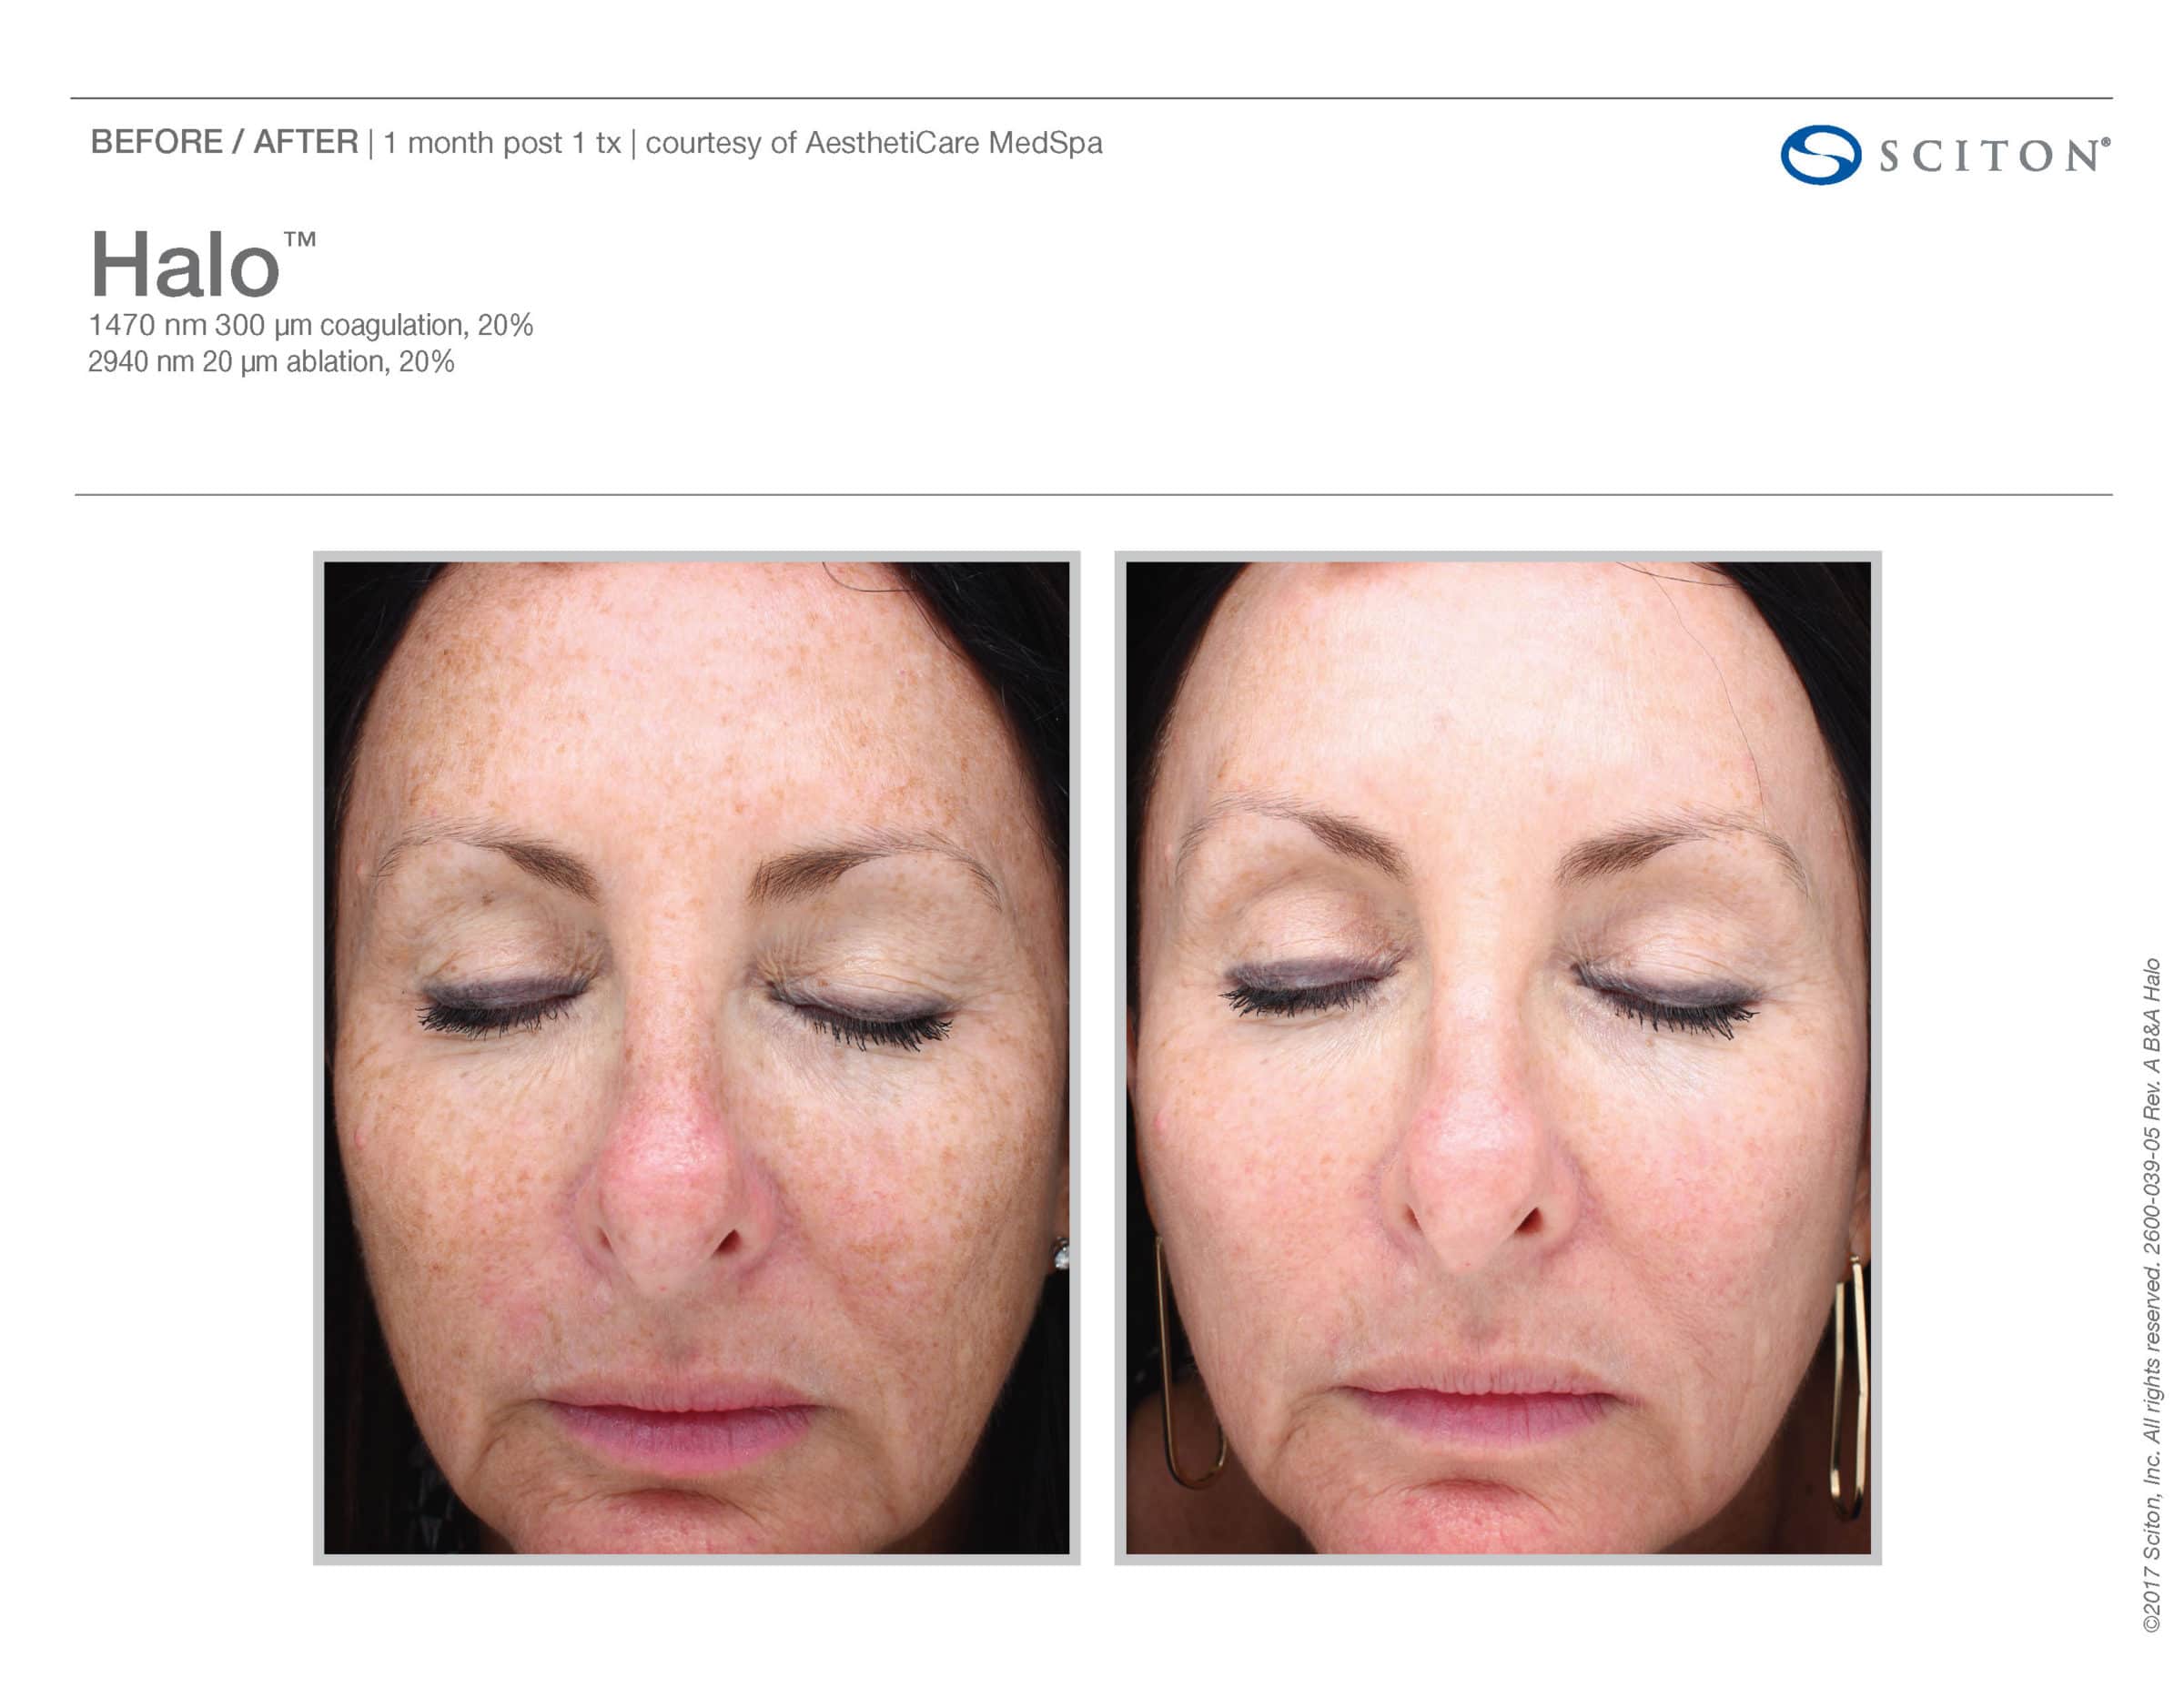 Before And After From Halo Fractional Laser. Halo Is Available At Well Medical Arts In Seattle. Call 206-935-5689 To Schedule Your Treatment Now.